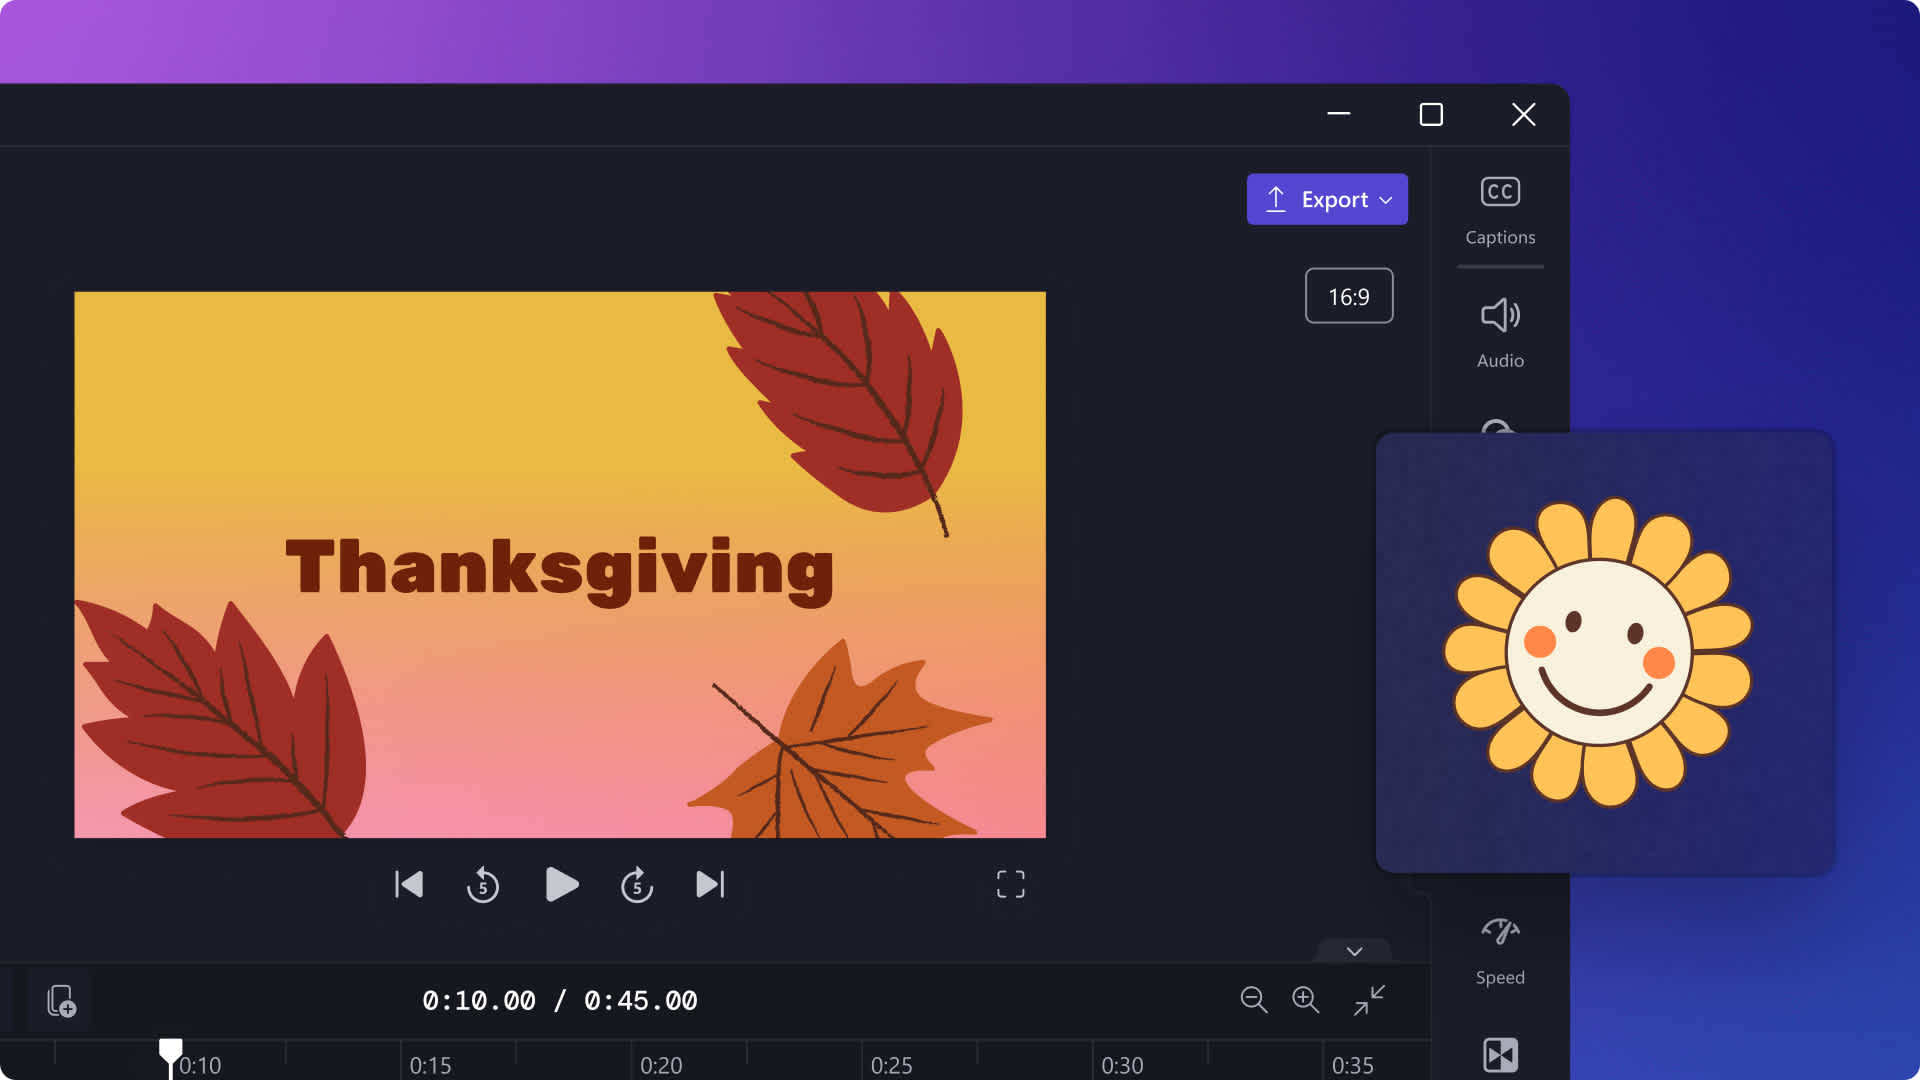 An image of the Thanksgiving thumbnail.